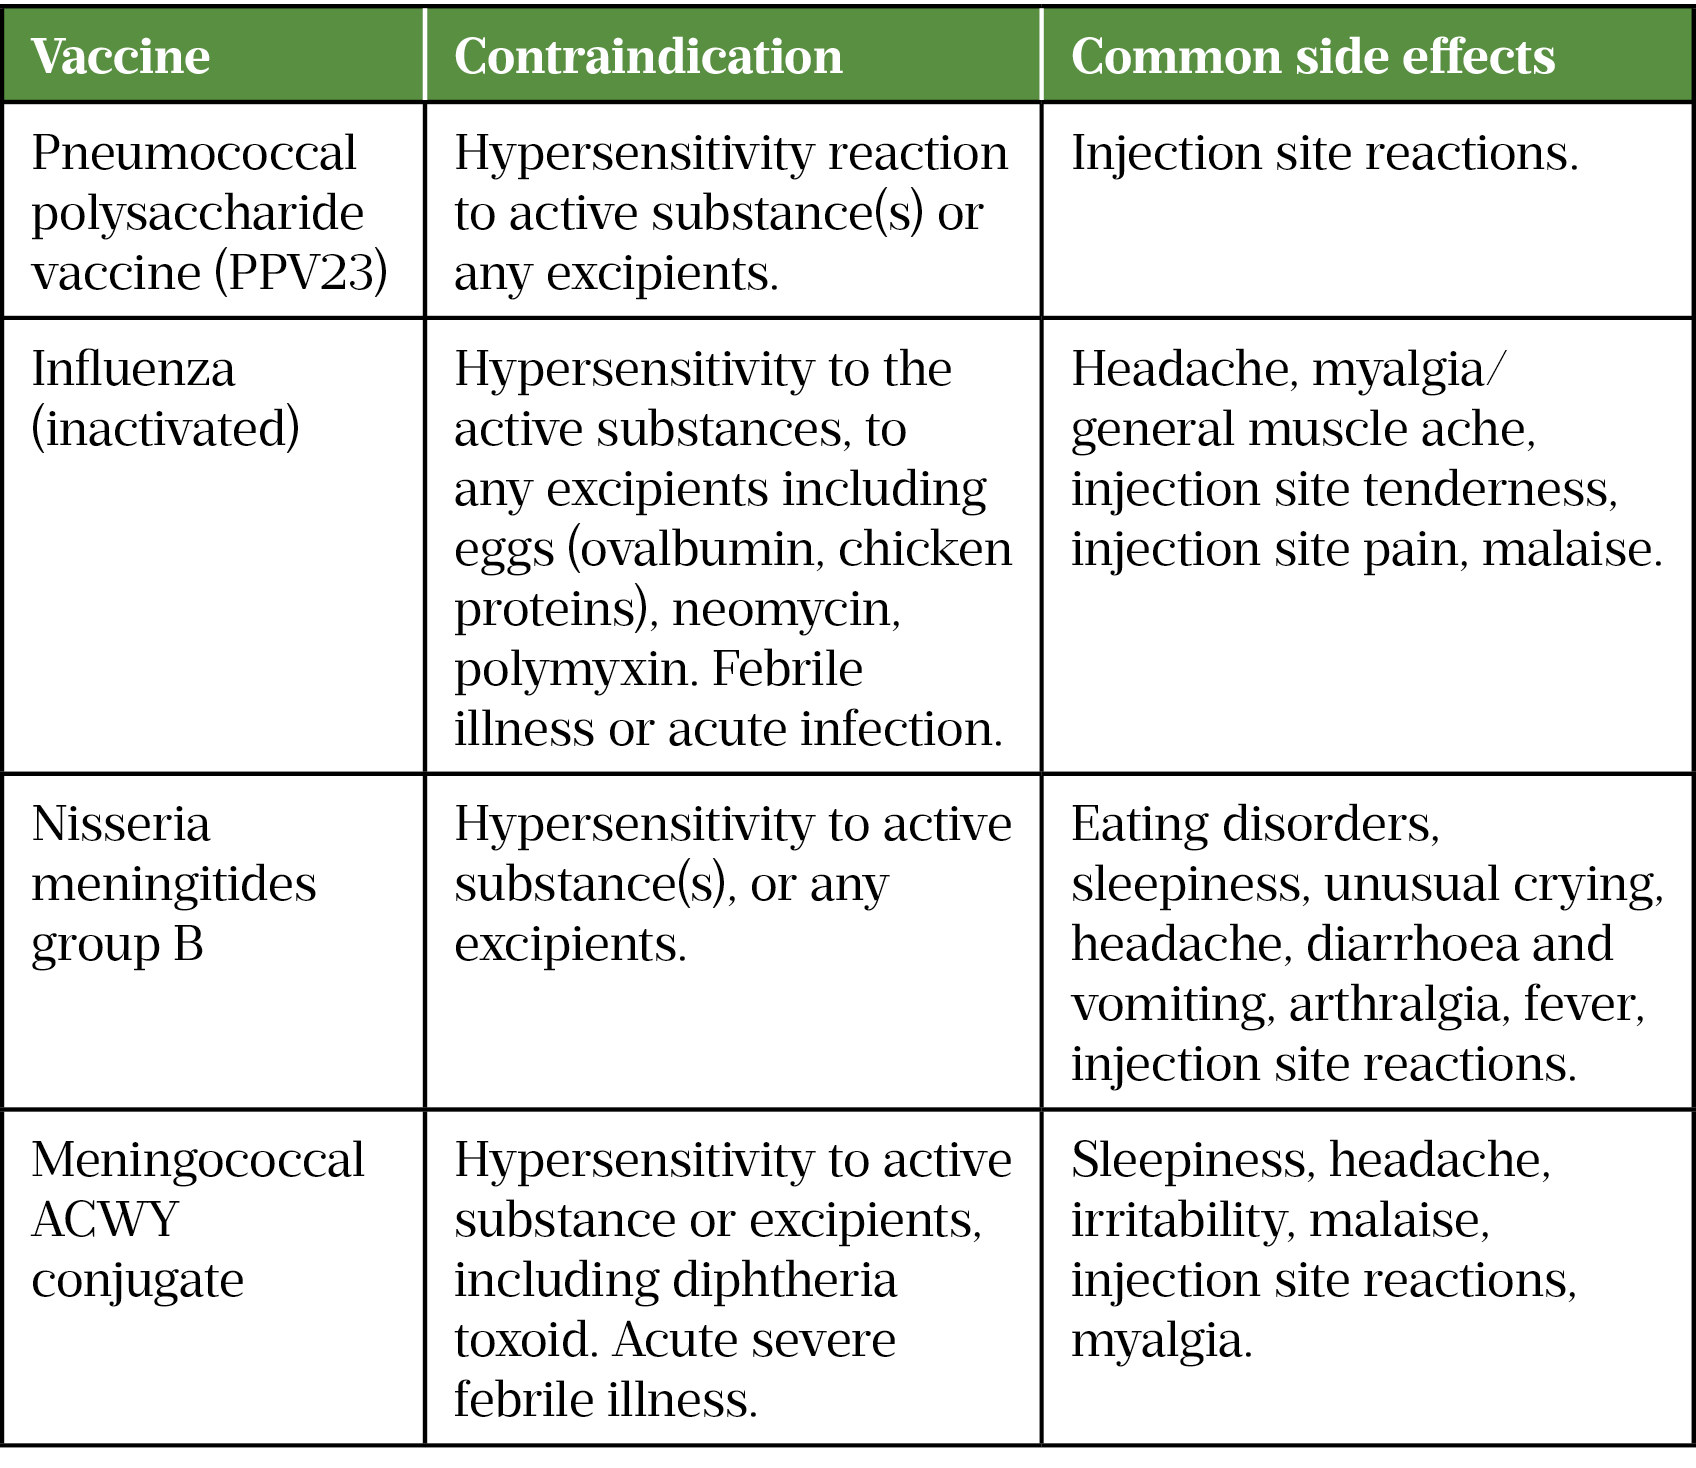 Table 3: Contraindications to vaccinations